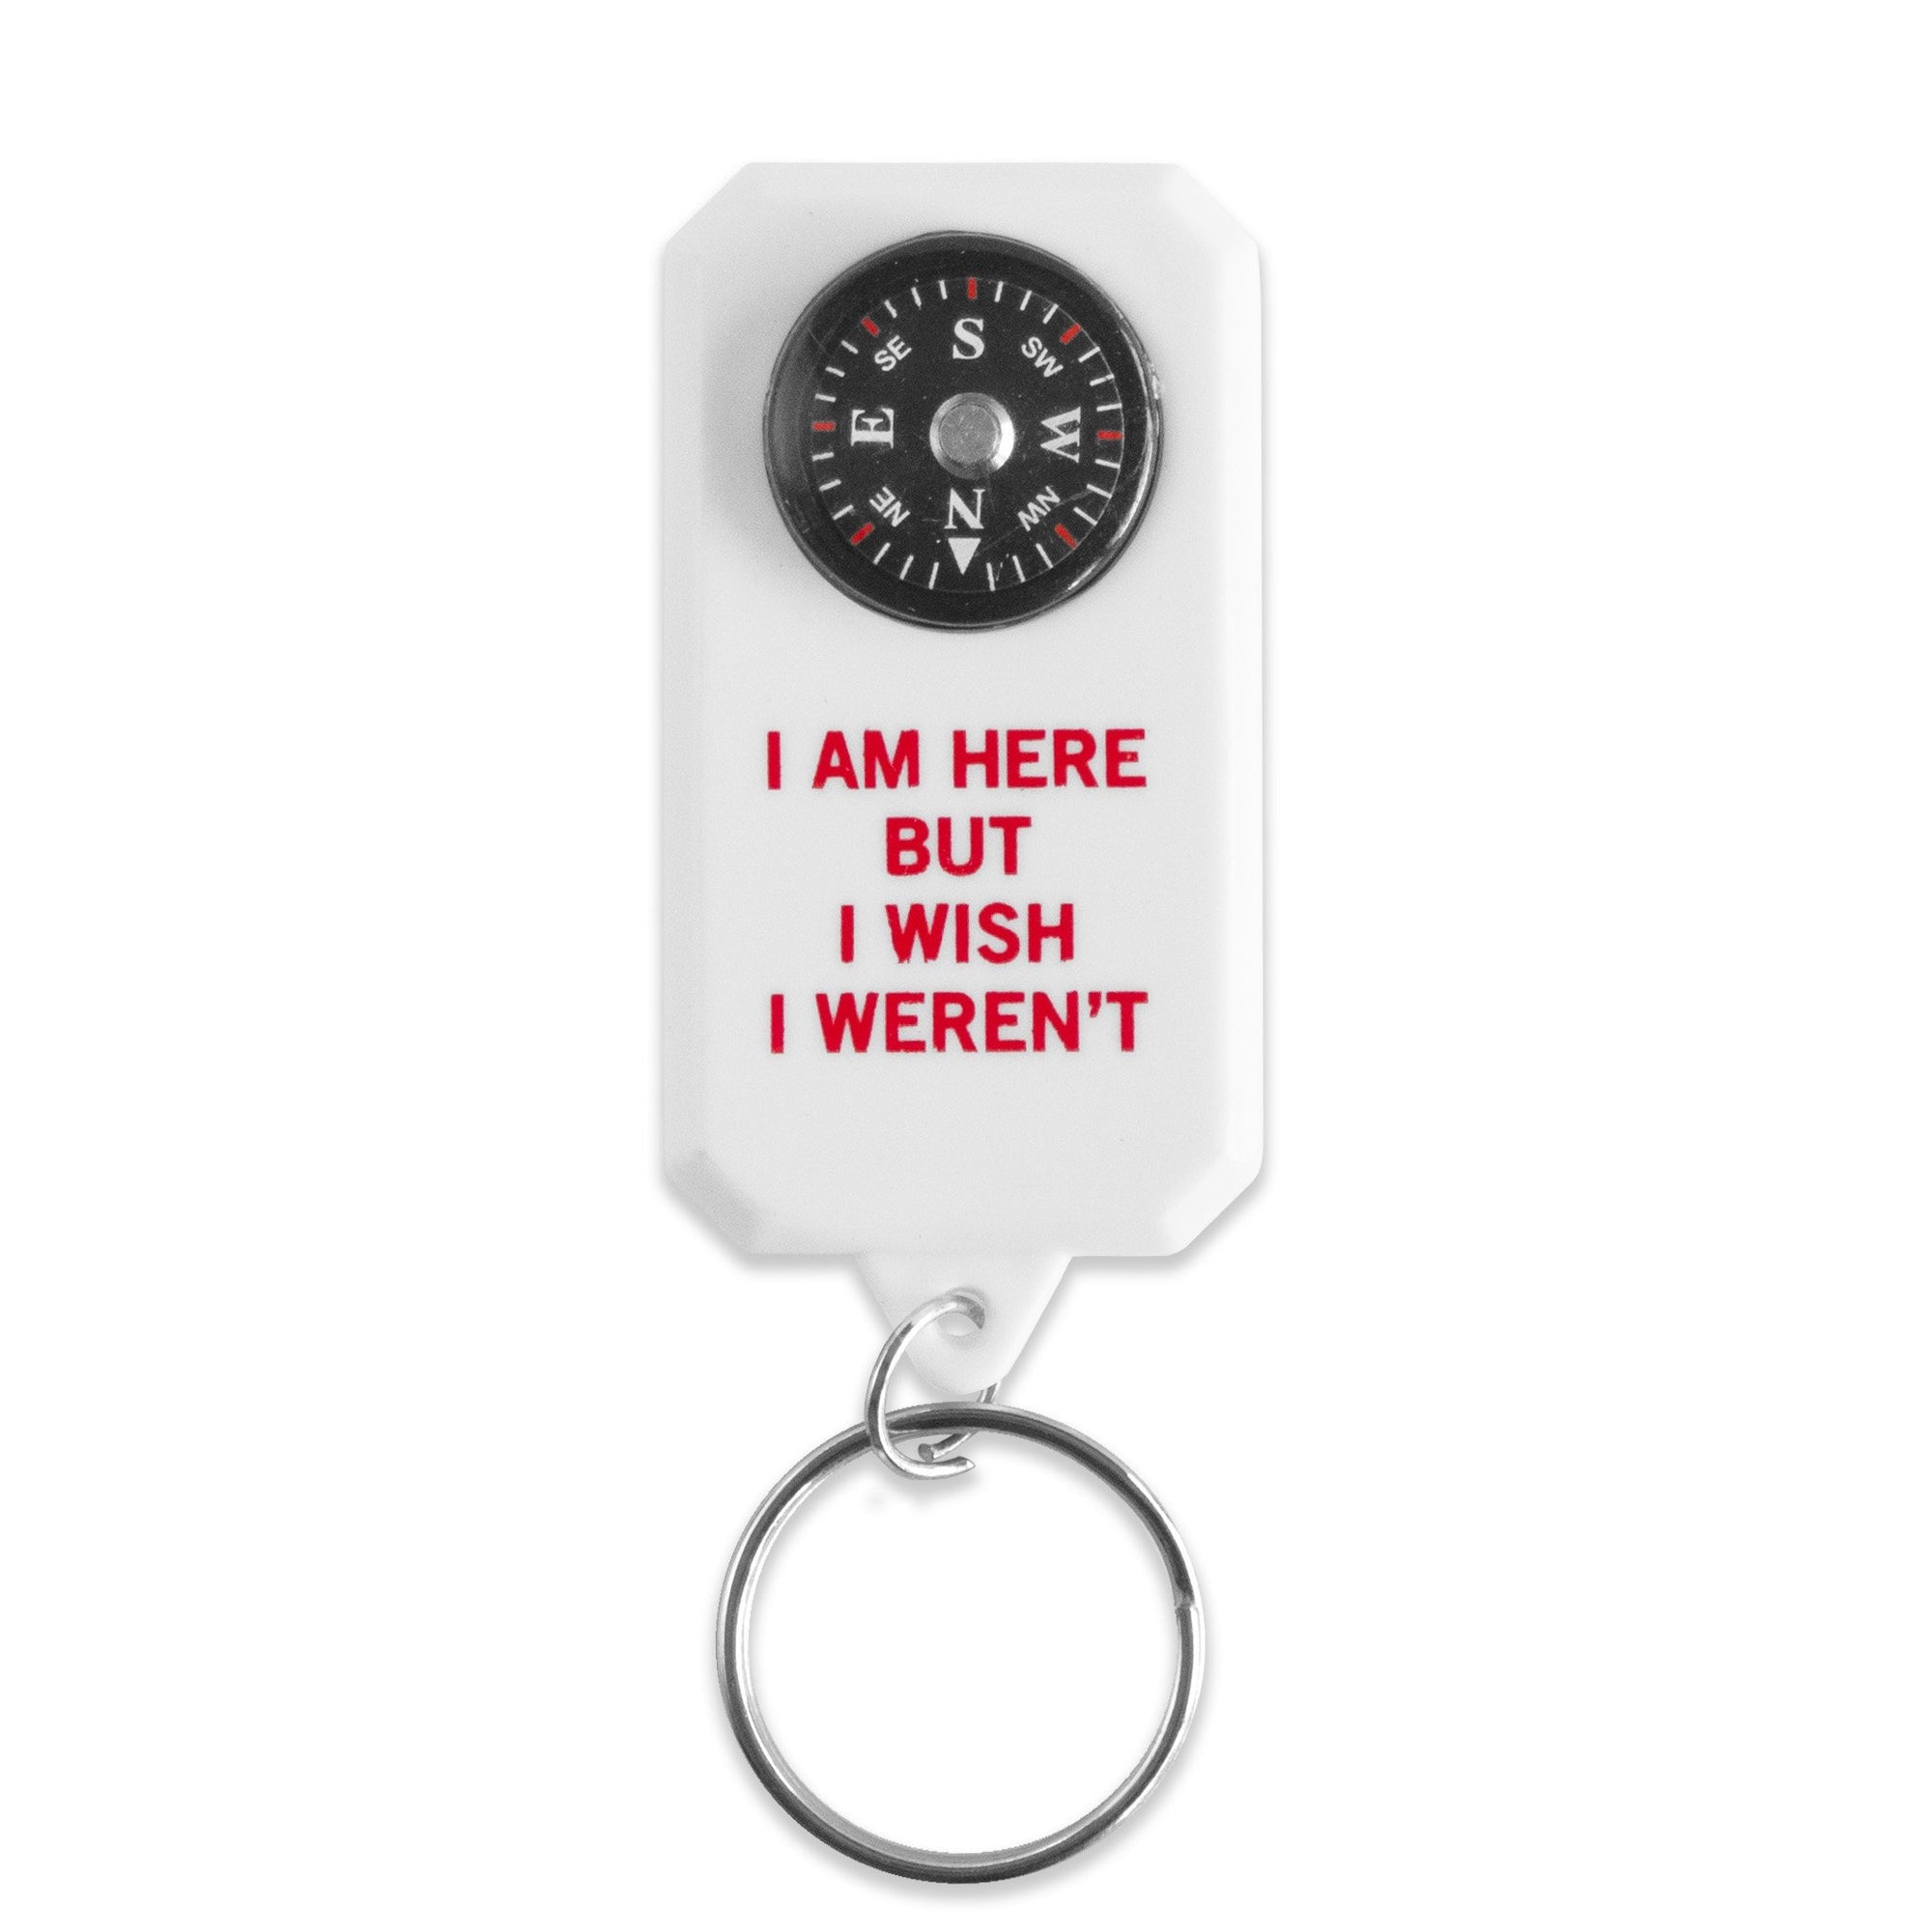 A photo of a keychain on a white background.  The keychain has a small functional compass near the top, and the phrase "I am here but I wish I weren't" is printed in red font underneath.